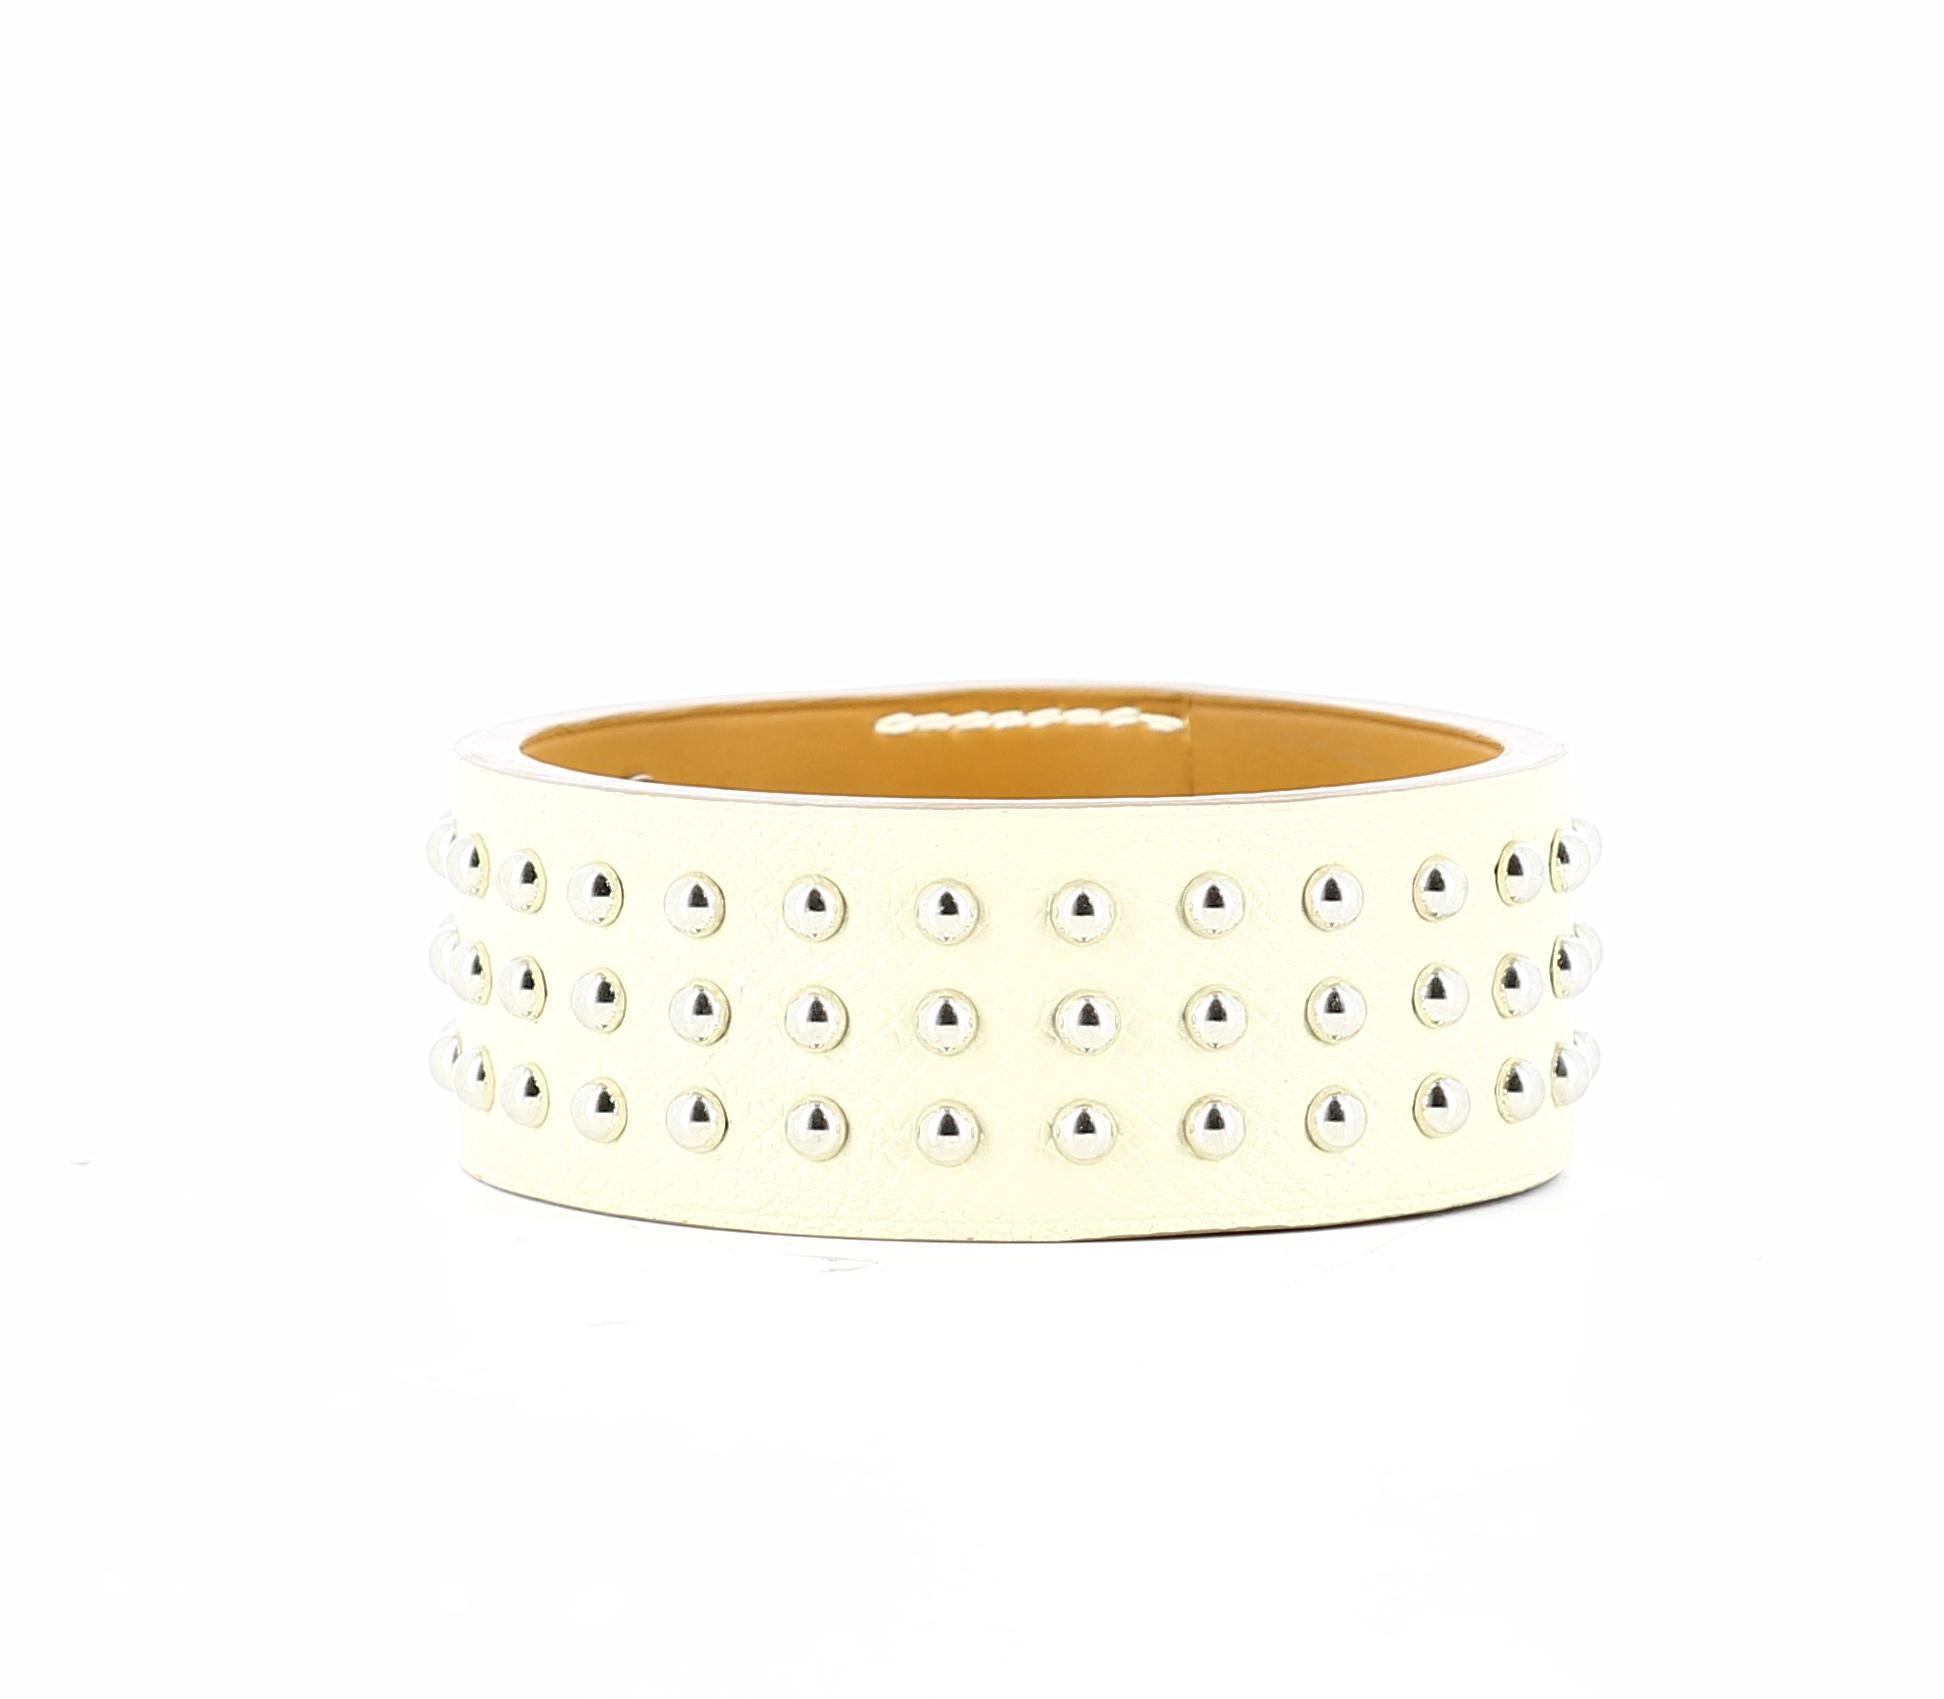 Hermes Ivory bracelet.
Very good condition, shows some signs of use and wear but nothing visible.
Epsom leather white bracelet with round shaped silver tone details.
Height
26 cm / 10 